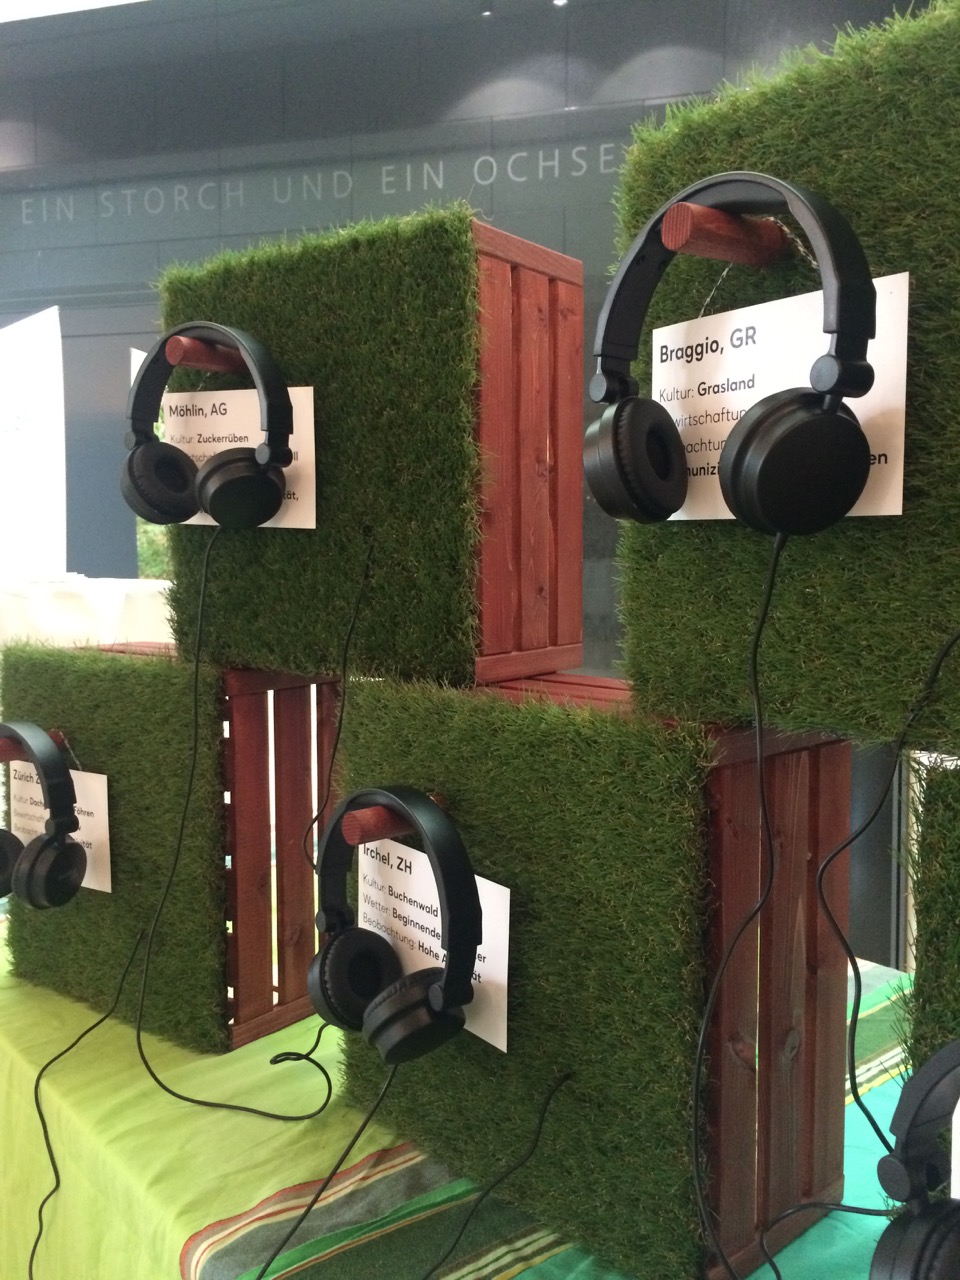 The mobile listening station consists of wooden boxes with headphones.